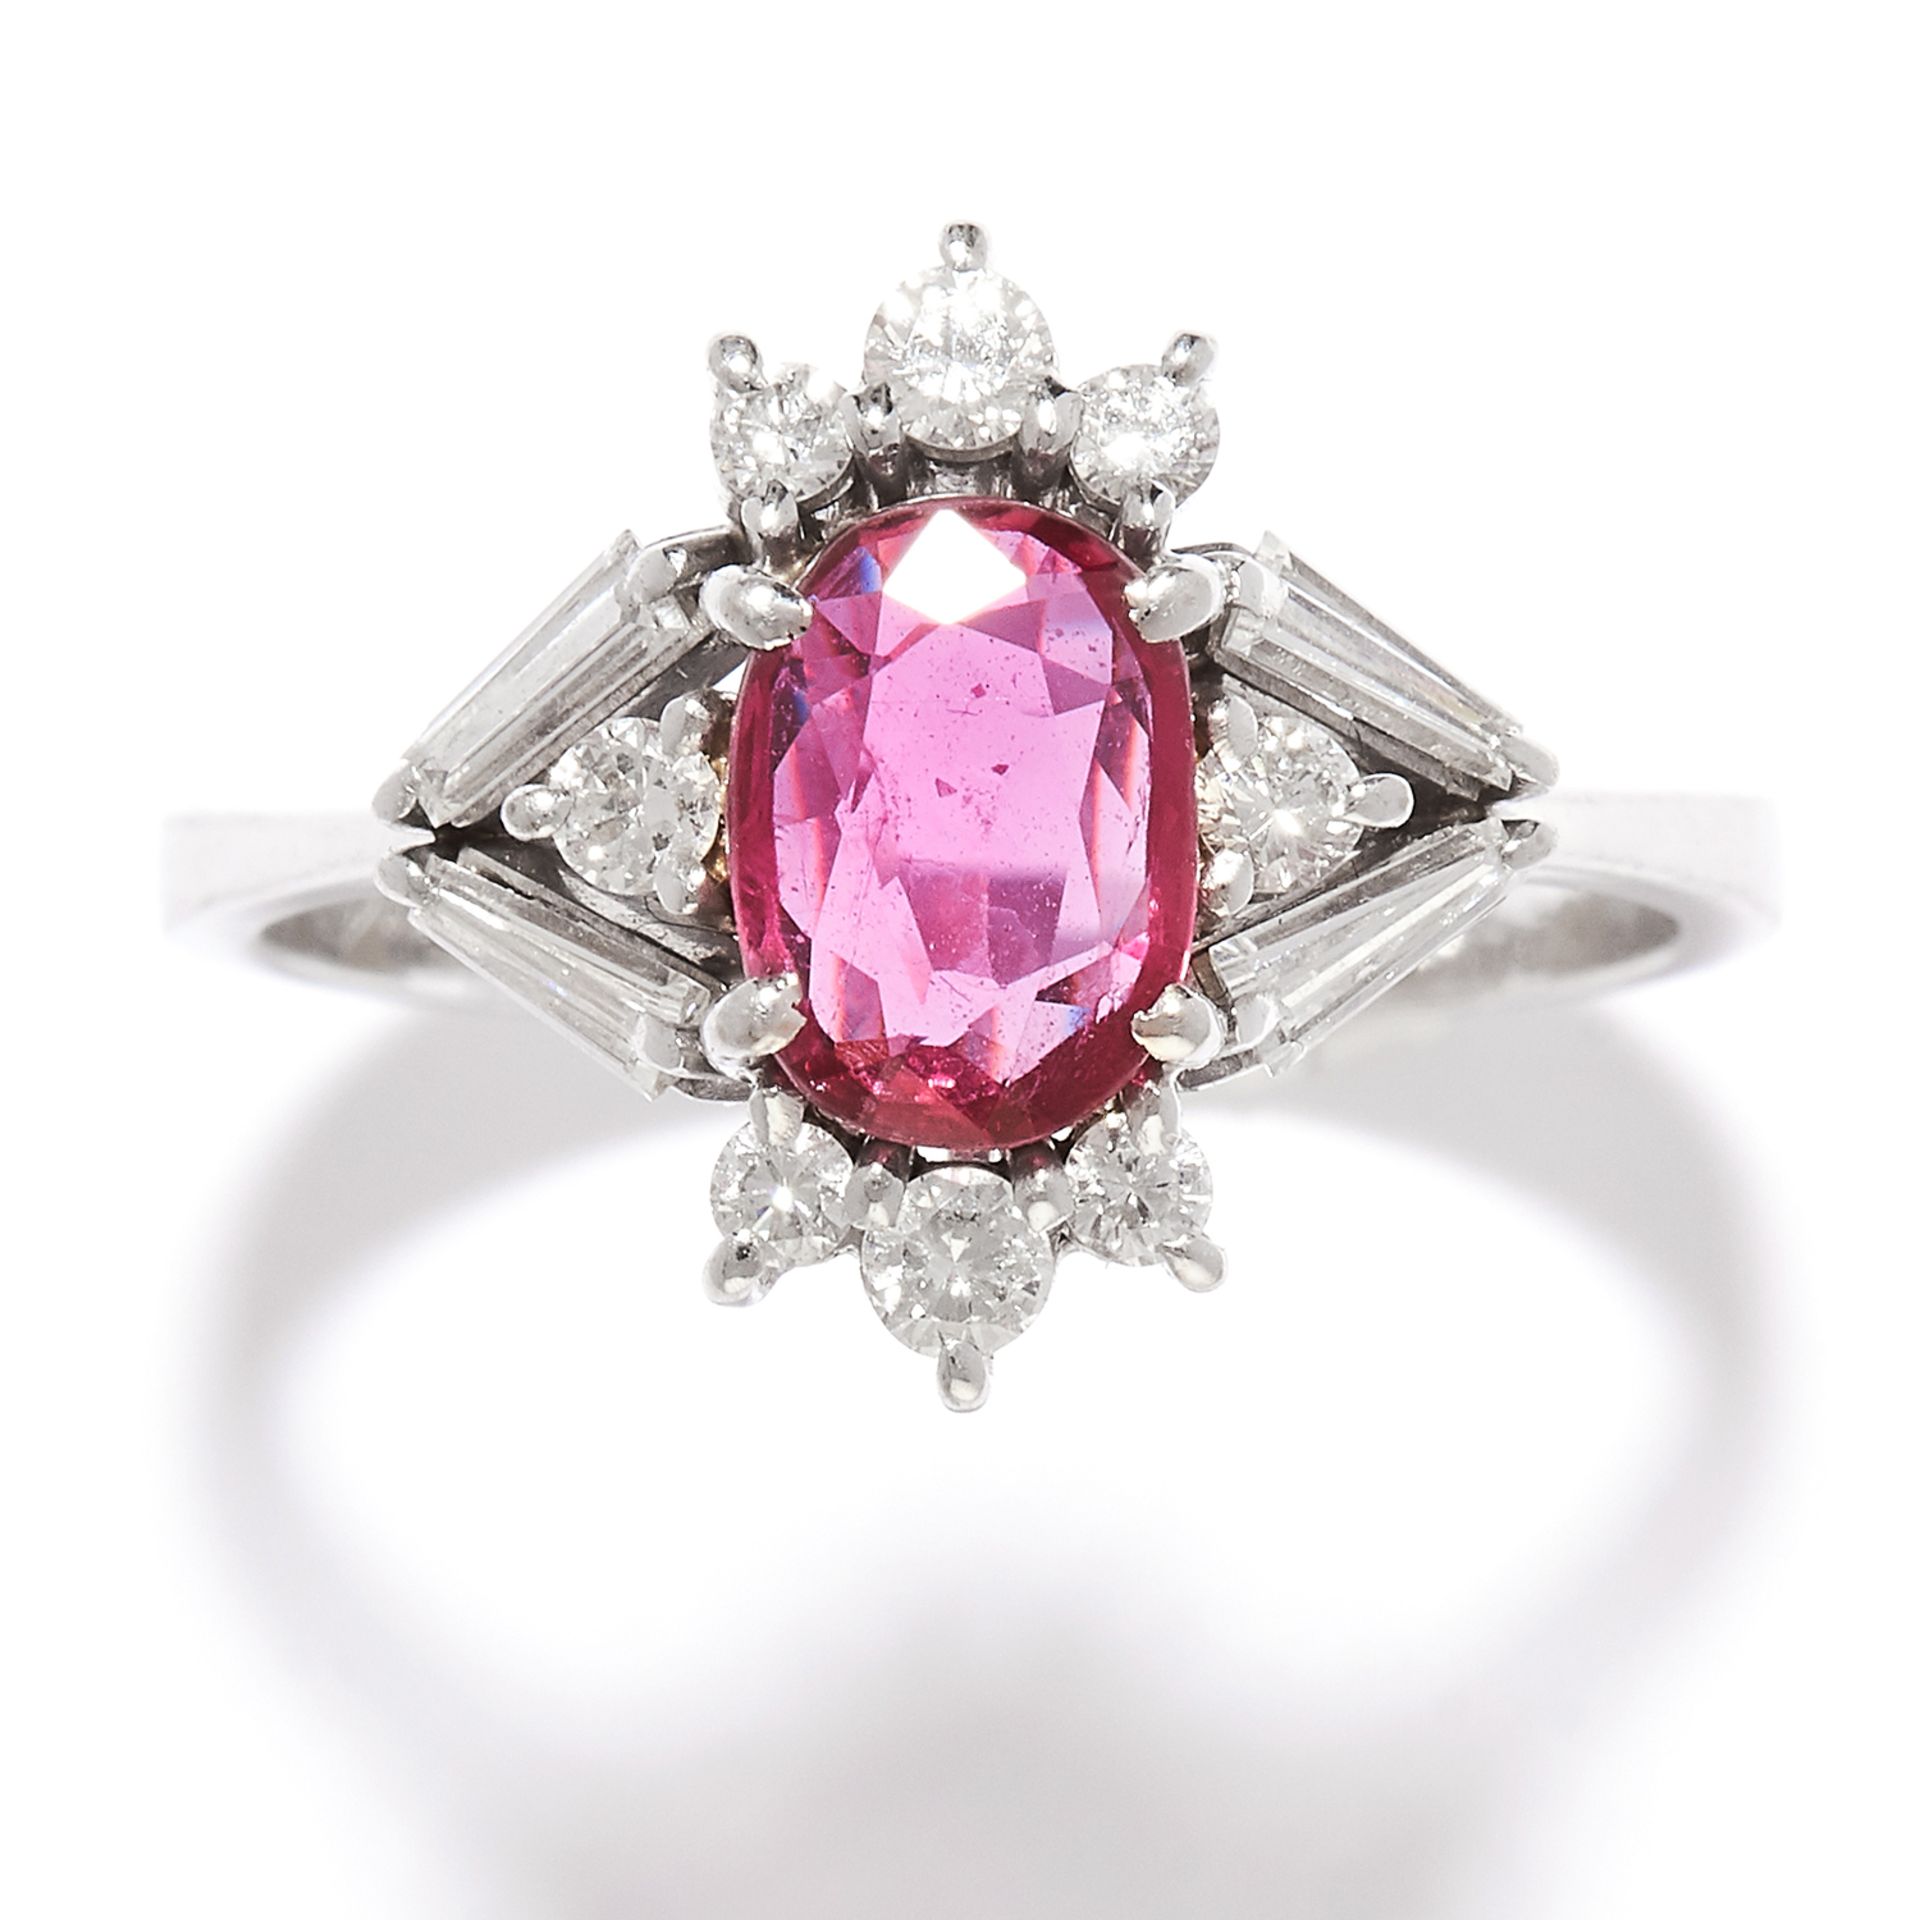 RUBY AND DIAMOND RING, H.STERN in 18ct white gold, set with an oval cut ruby of approximately 0.59